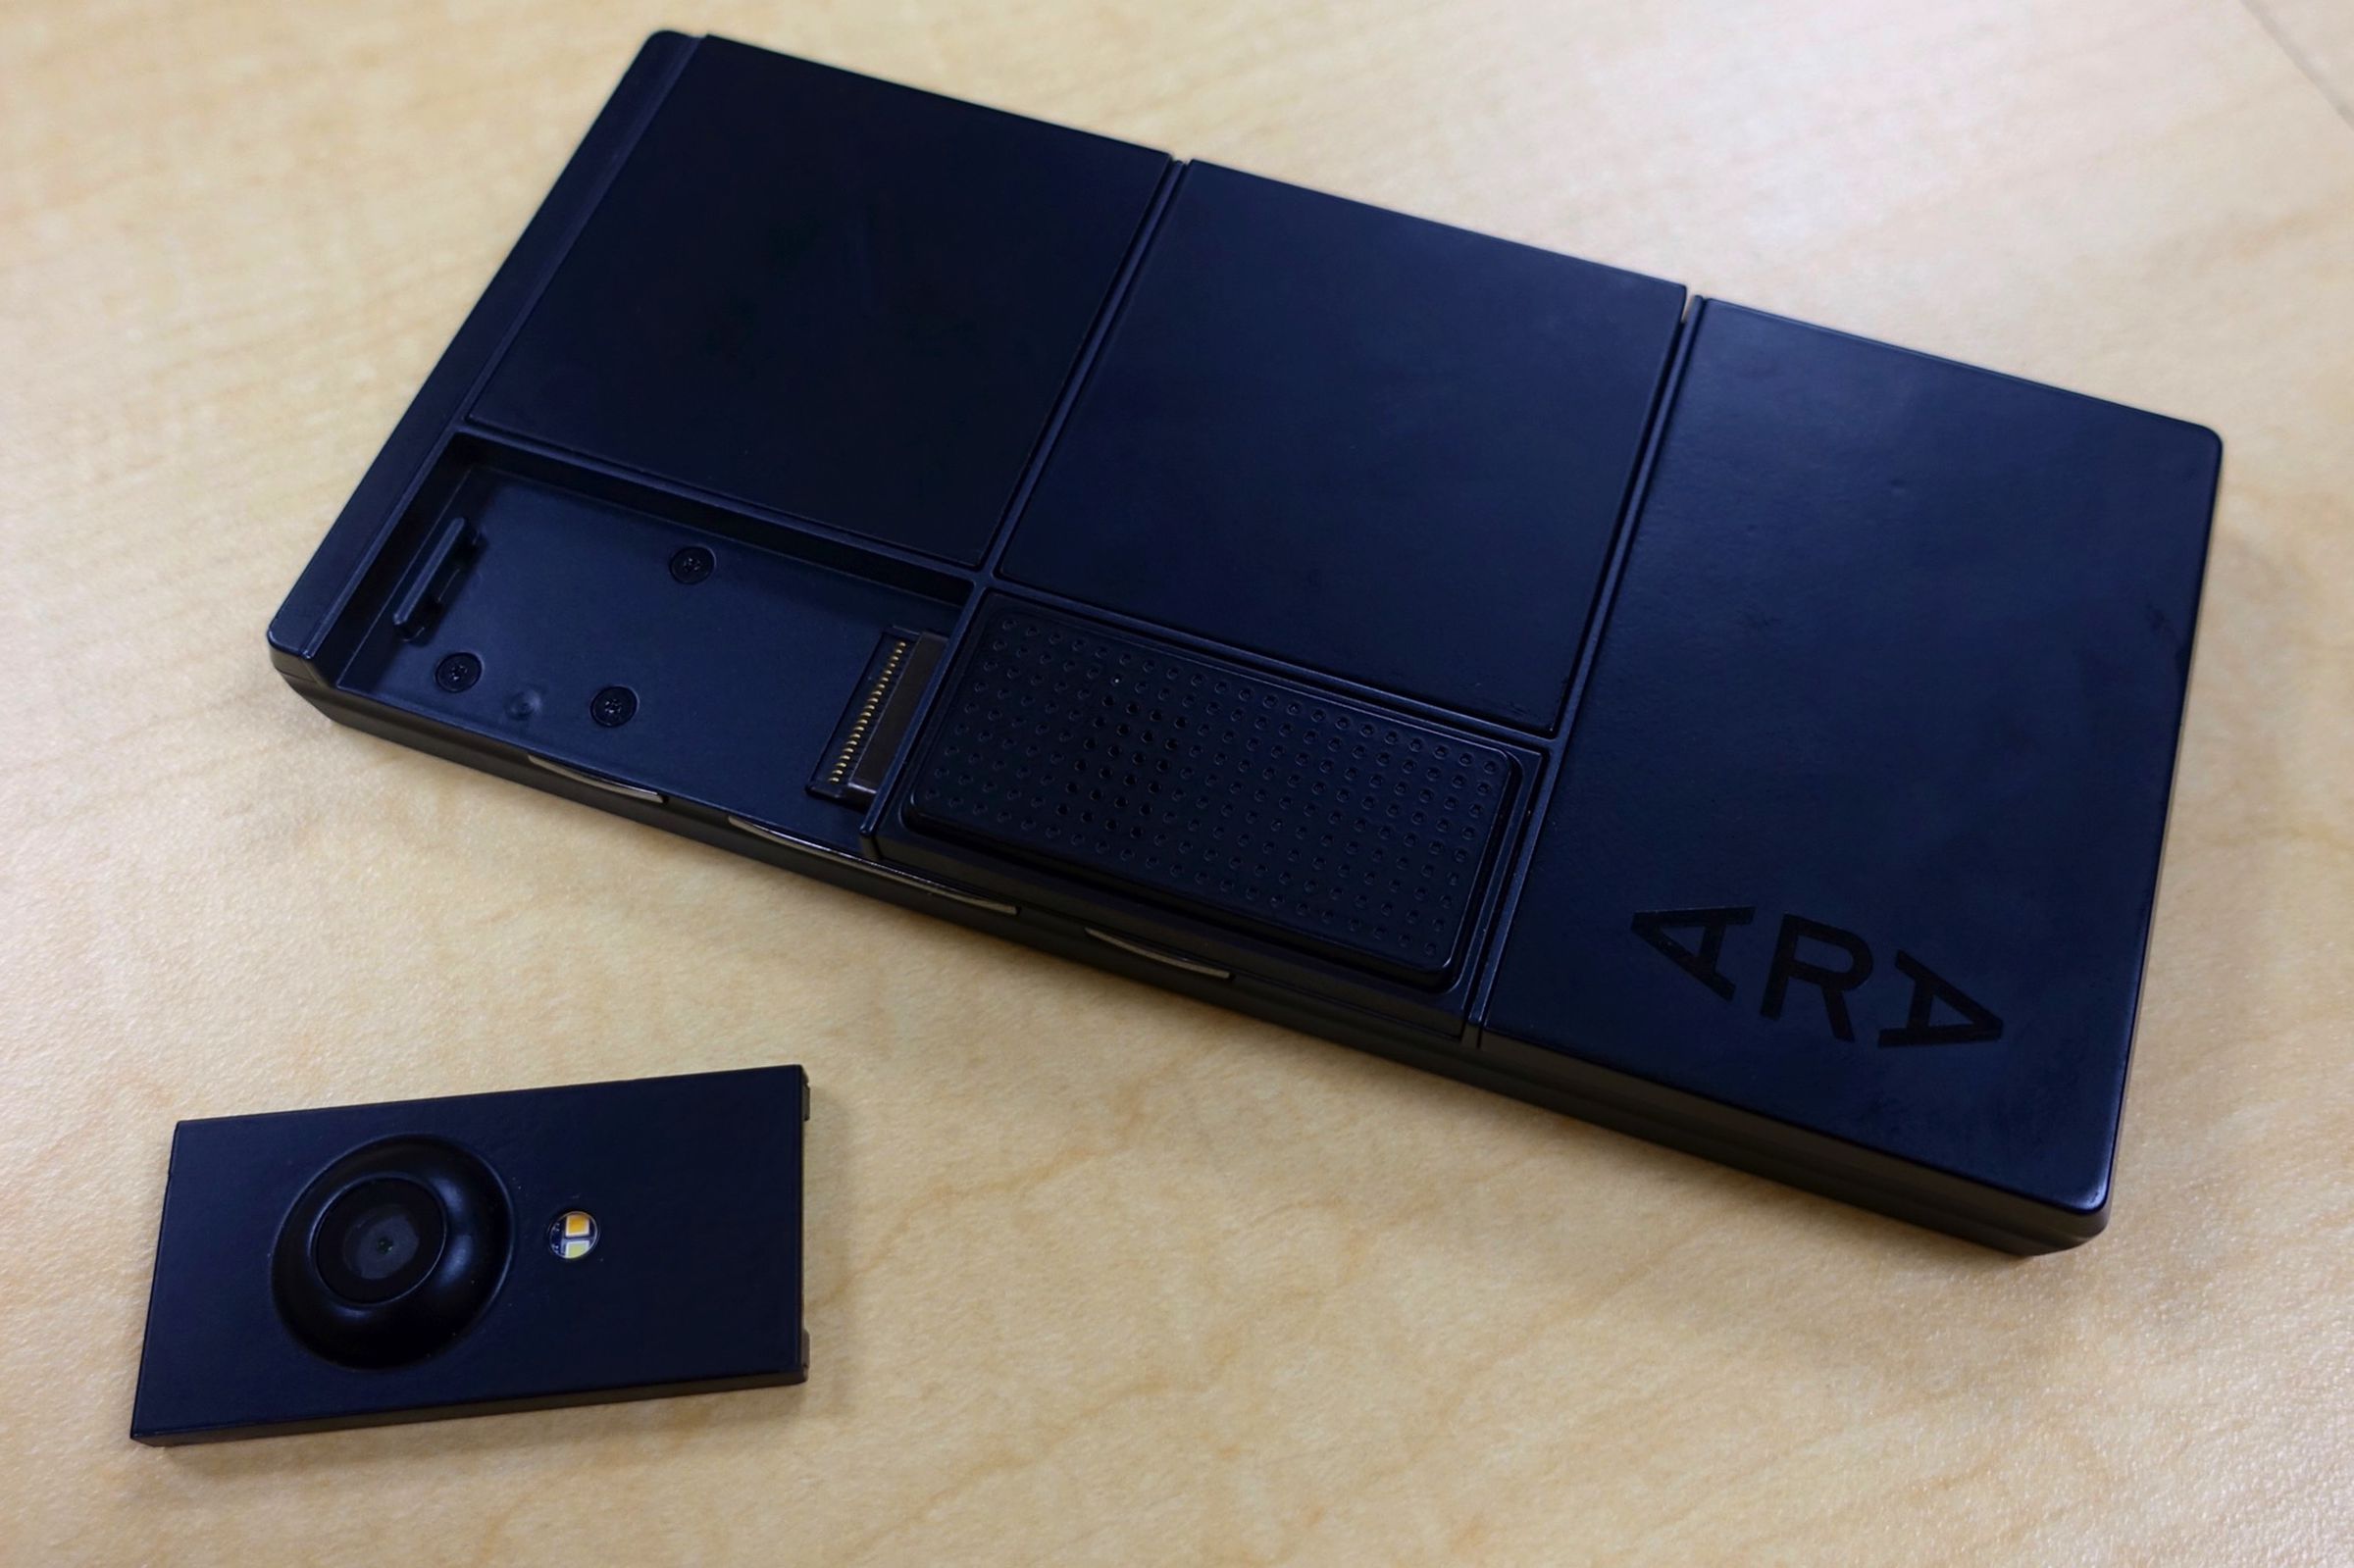 Project Ara hands-on photos